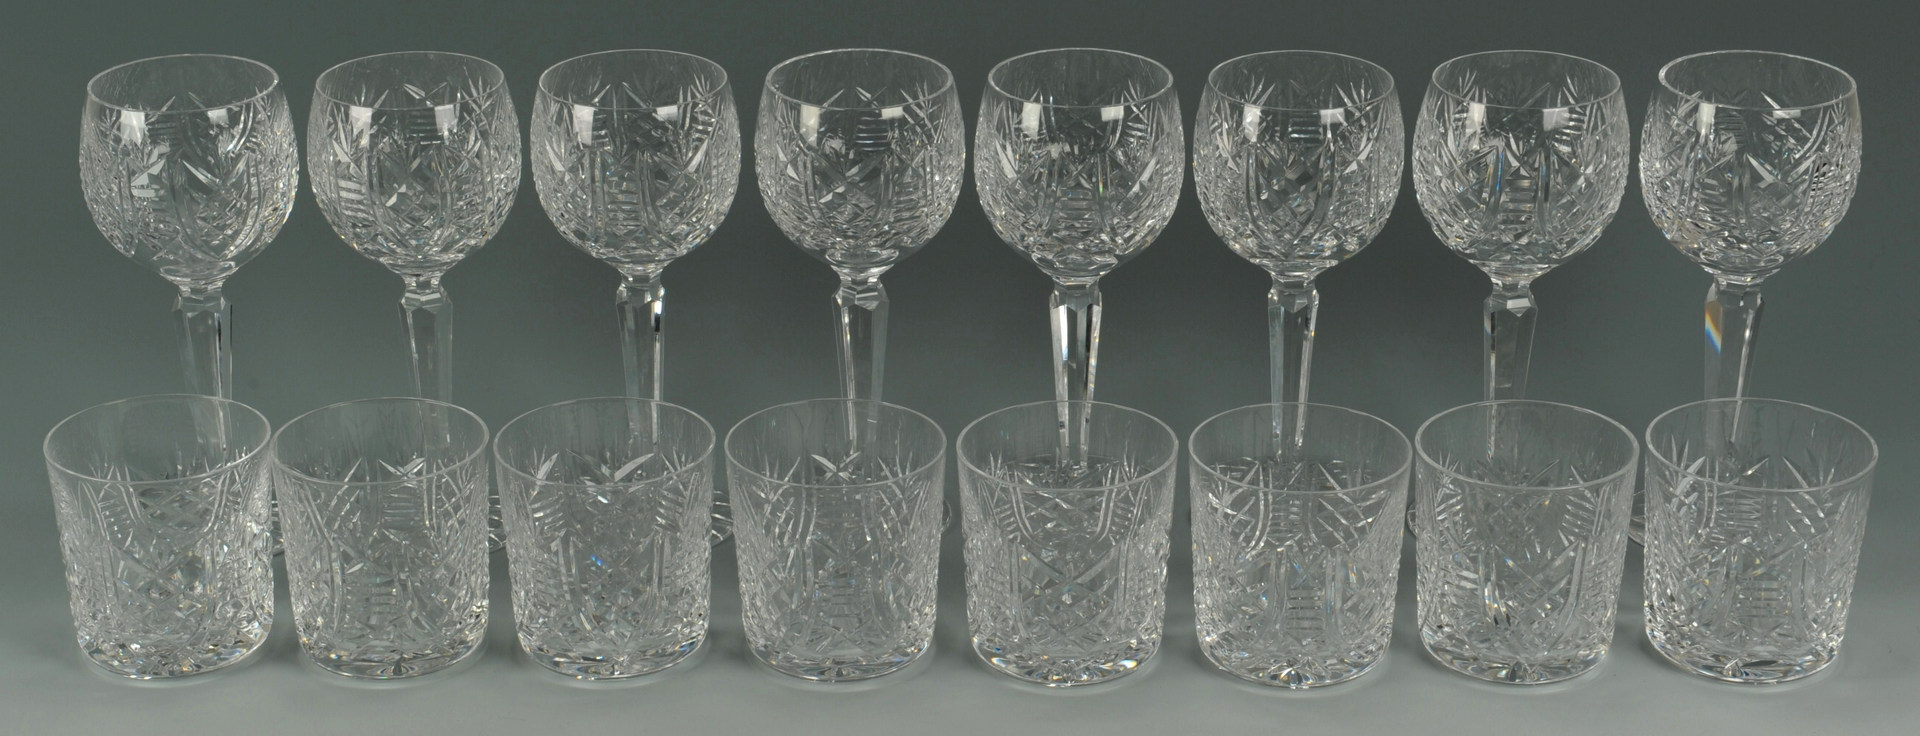 Lot 118: Waterford Clare Crystal Wine Hocks & Tumblers